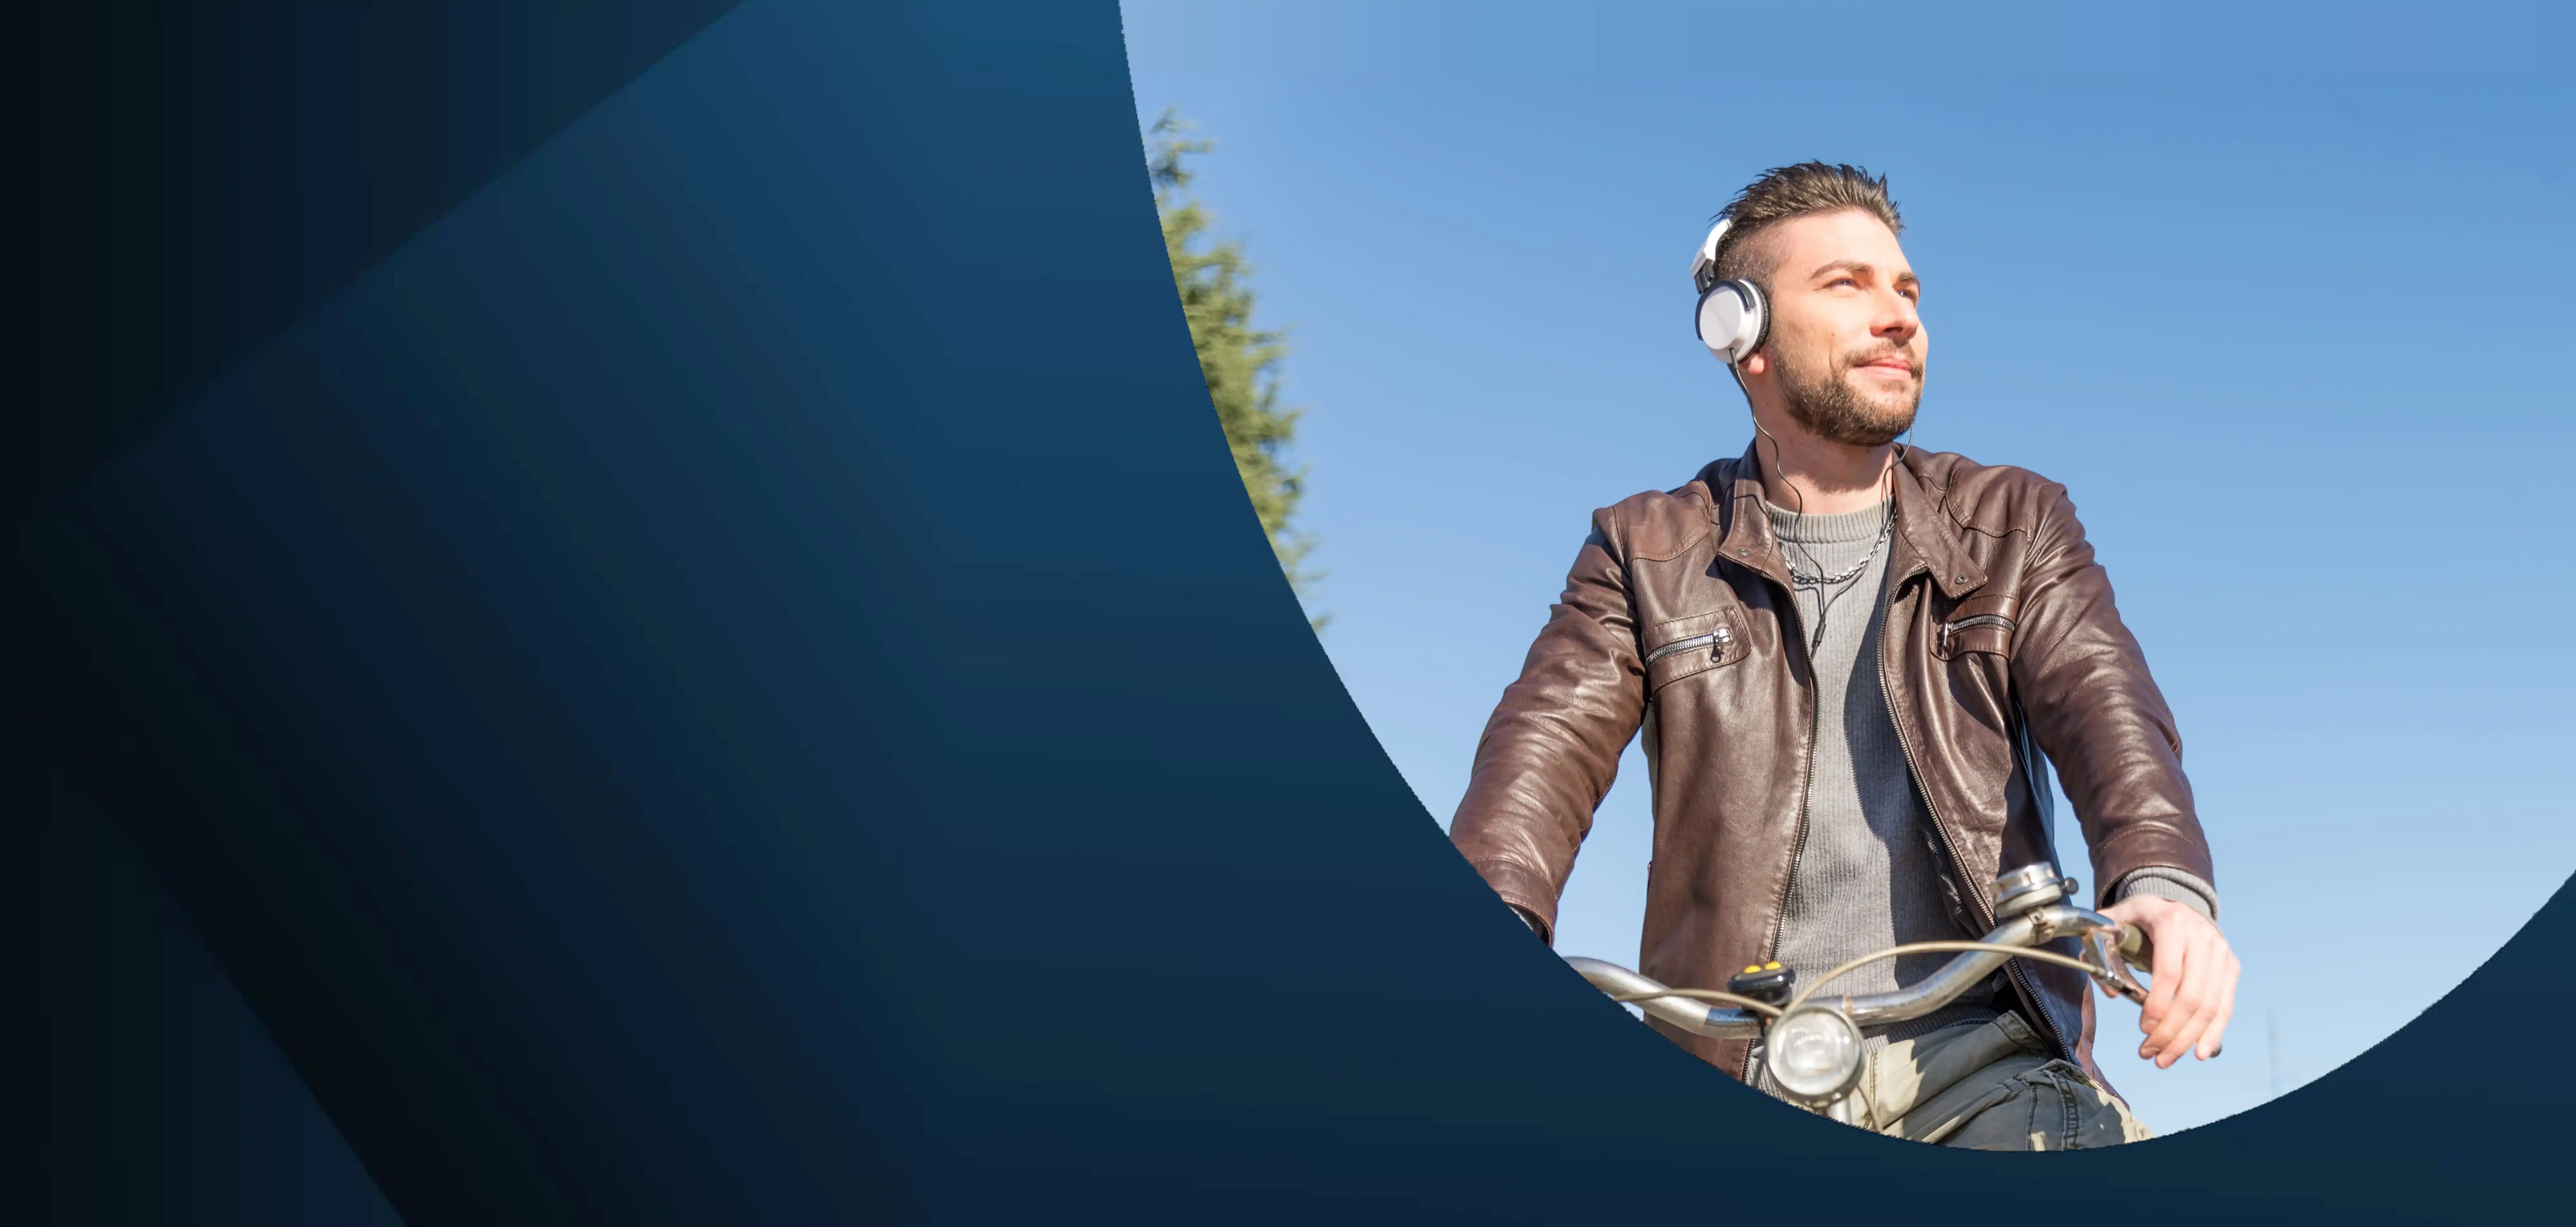 man riding a bike and hearing song with headphone